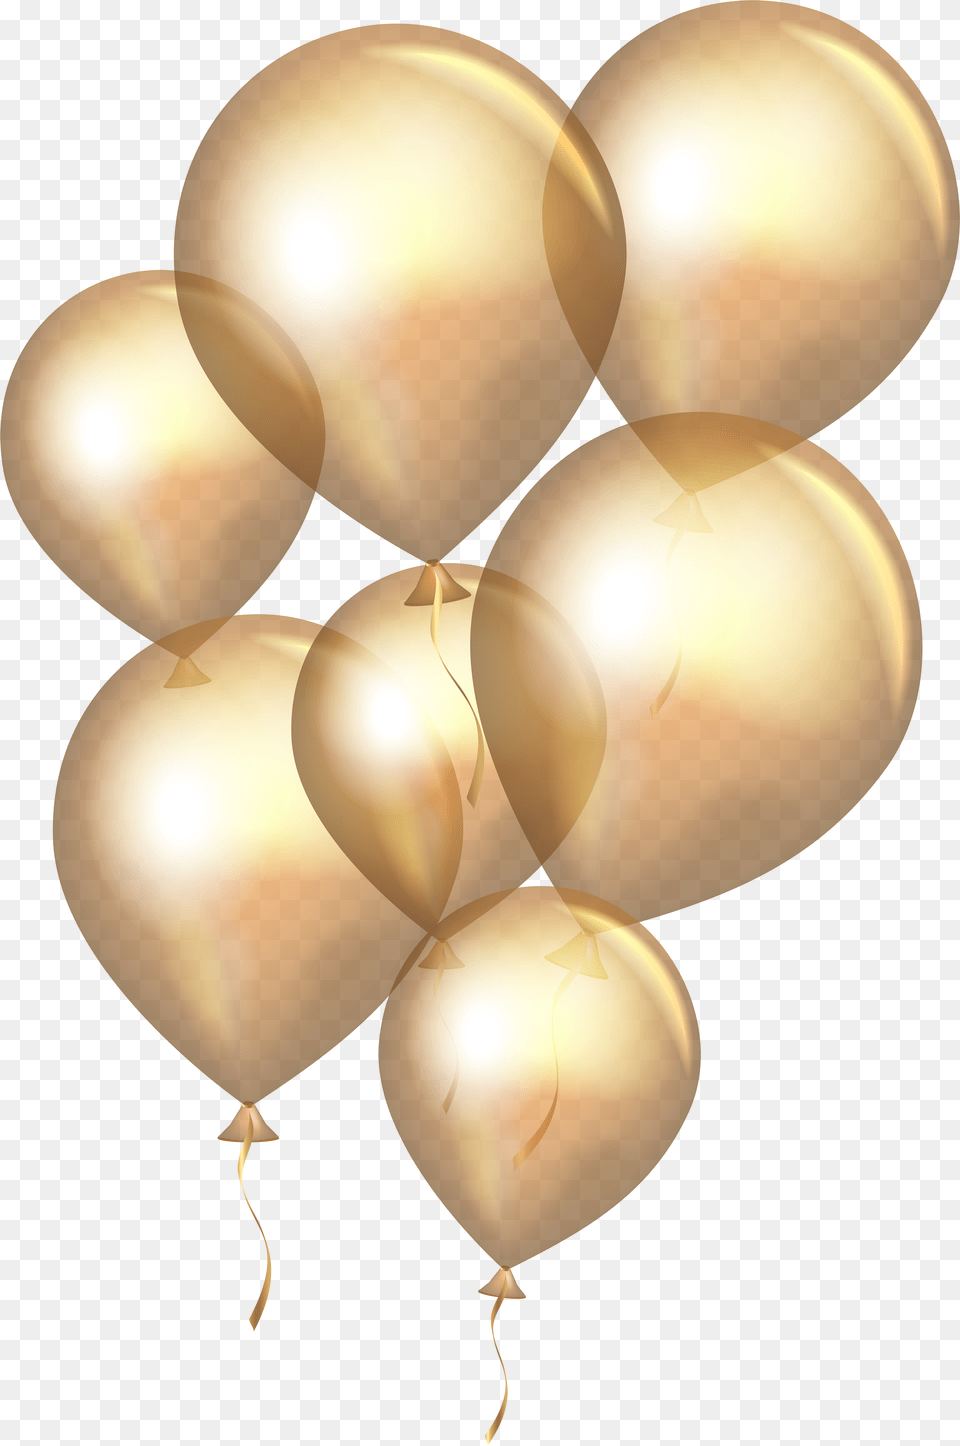 Library Of Gold Star Balloons Transparent Background Clip Transparent Background Golden Balloon Free Png